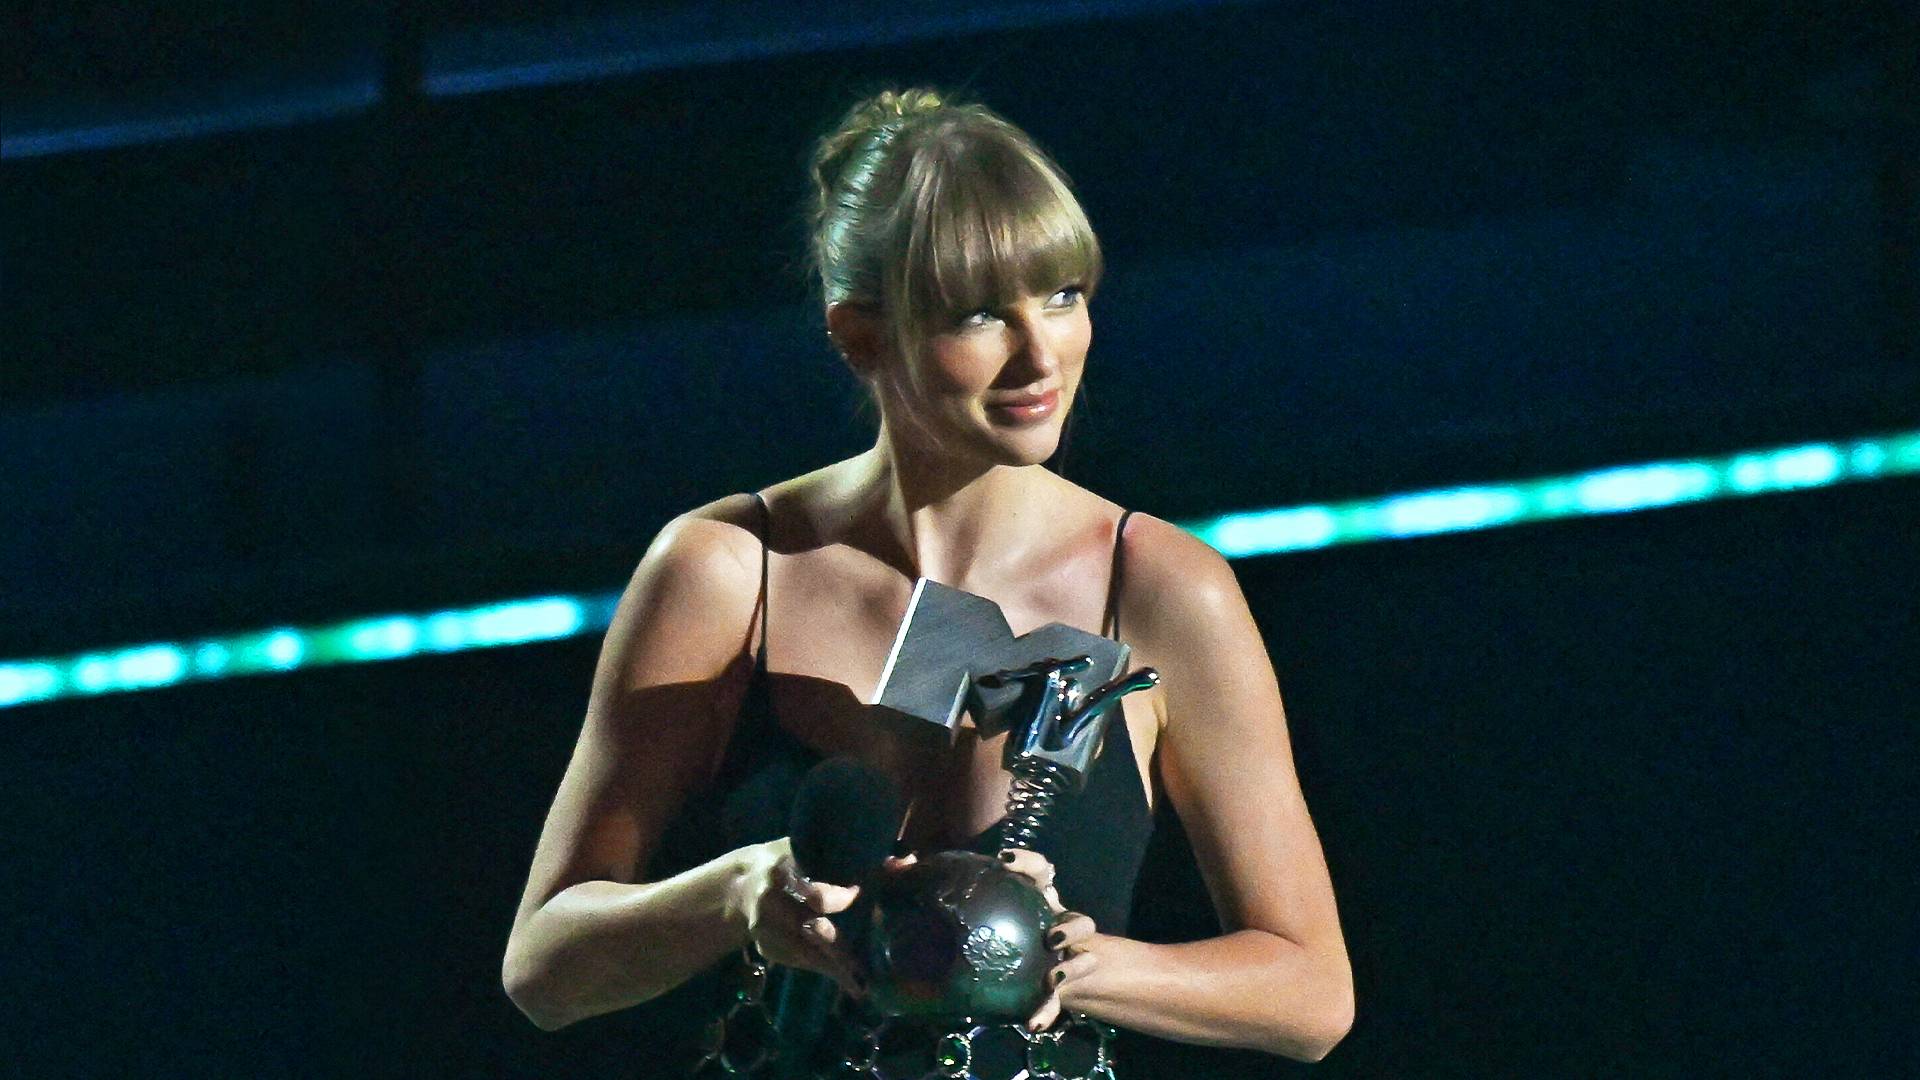 US singer-songwriter Taylor Swift poses with the award for "Best Longform Video" during the 2022 MTV Europe Music Awards in Düsseldorf, on November 13, 2022. (Photo by Sascha Schuermann / AFP) (Photo by SASCHA SCHUERMANN/AFP via Getty Images)